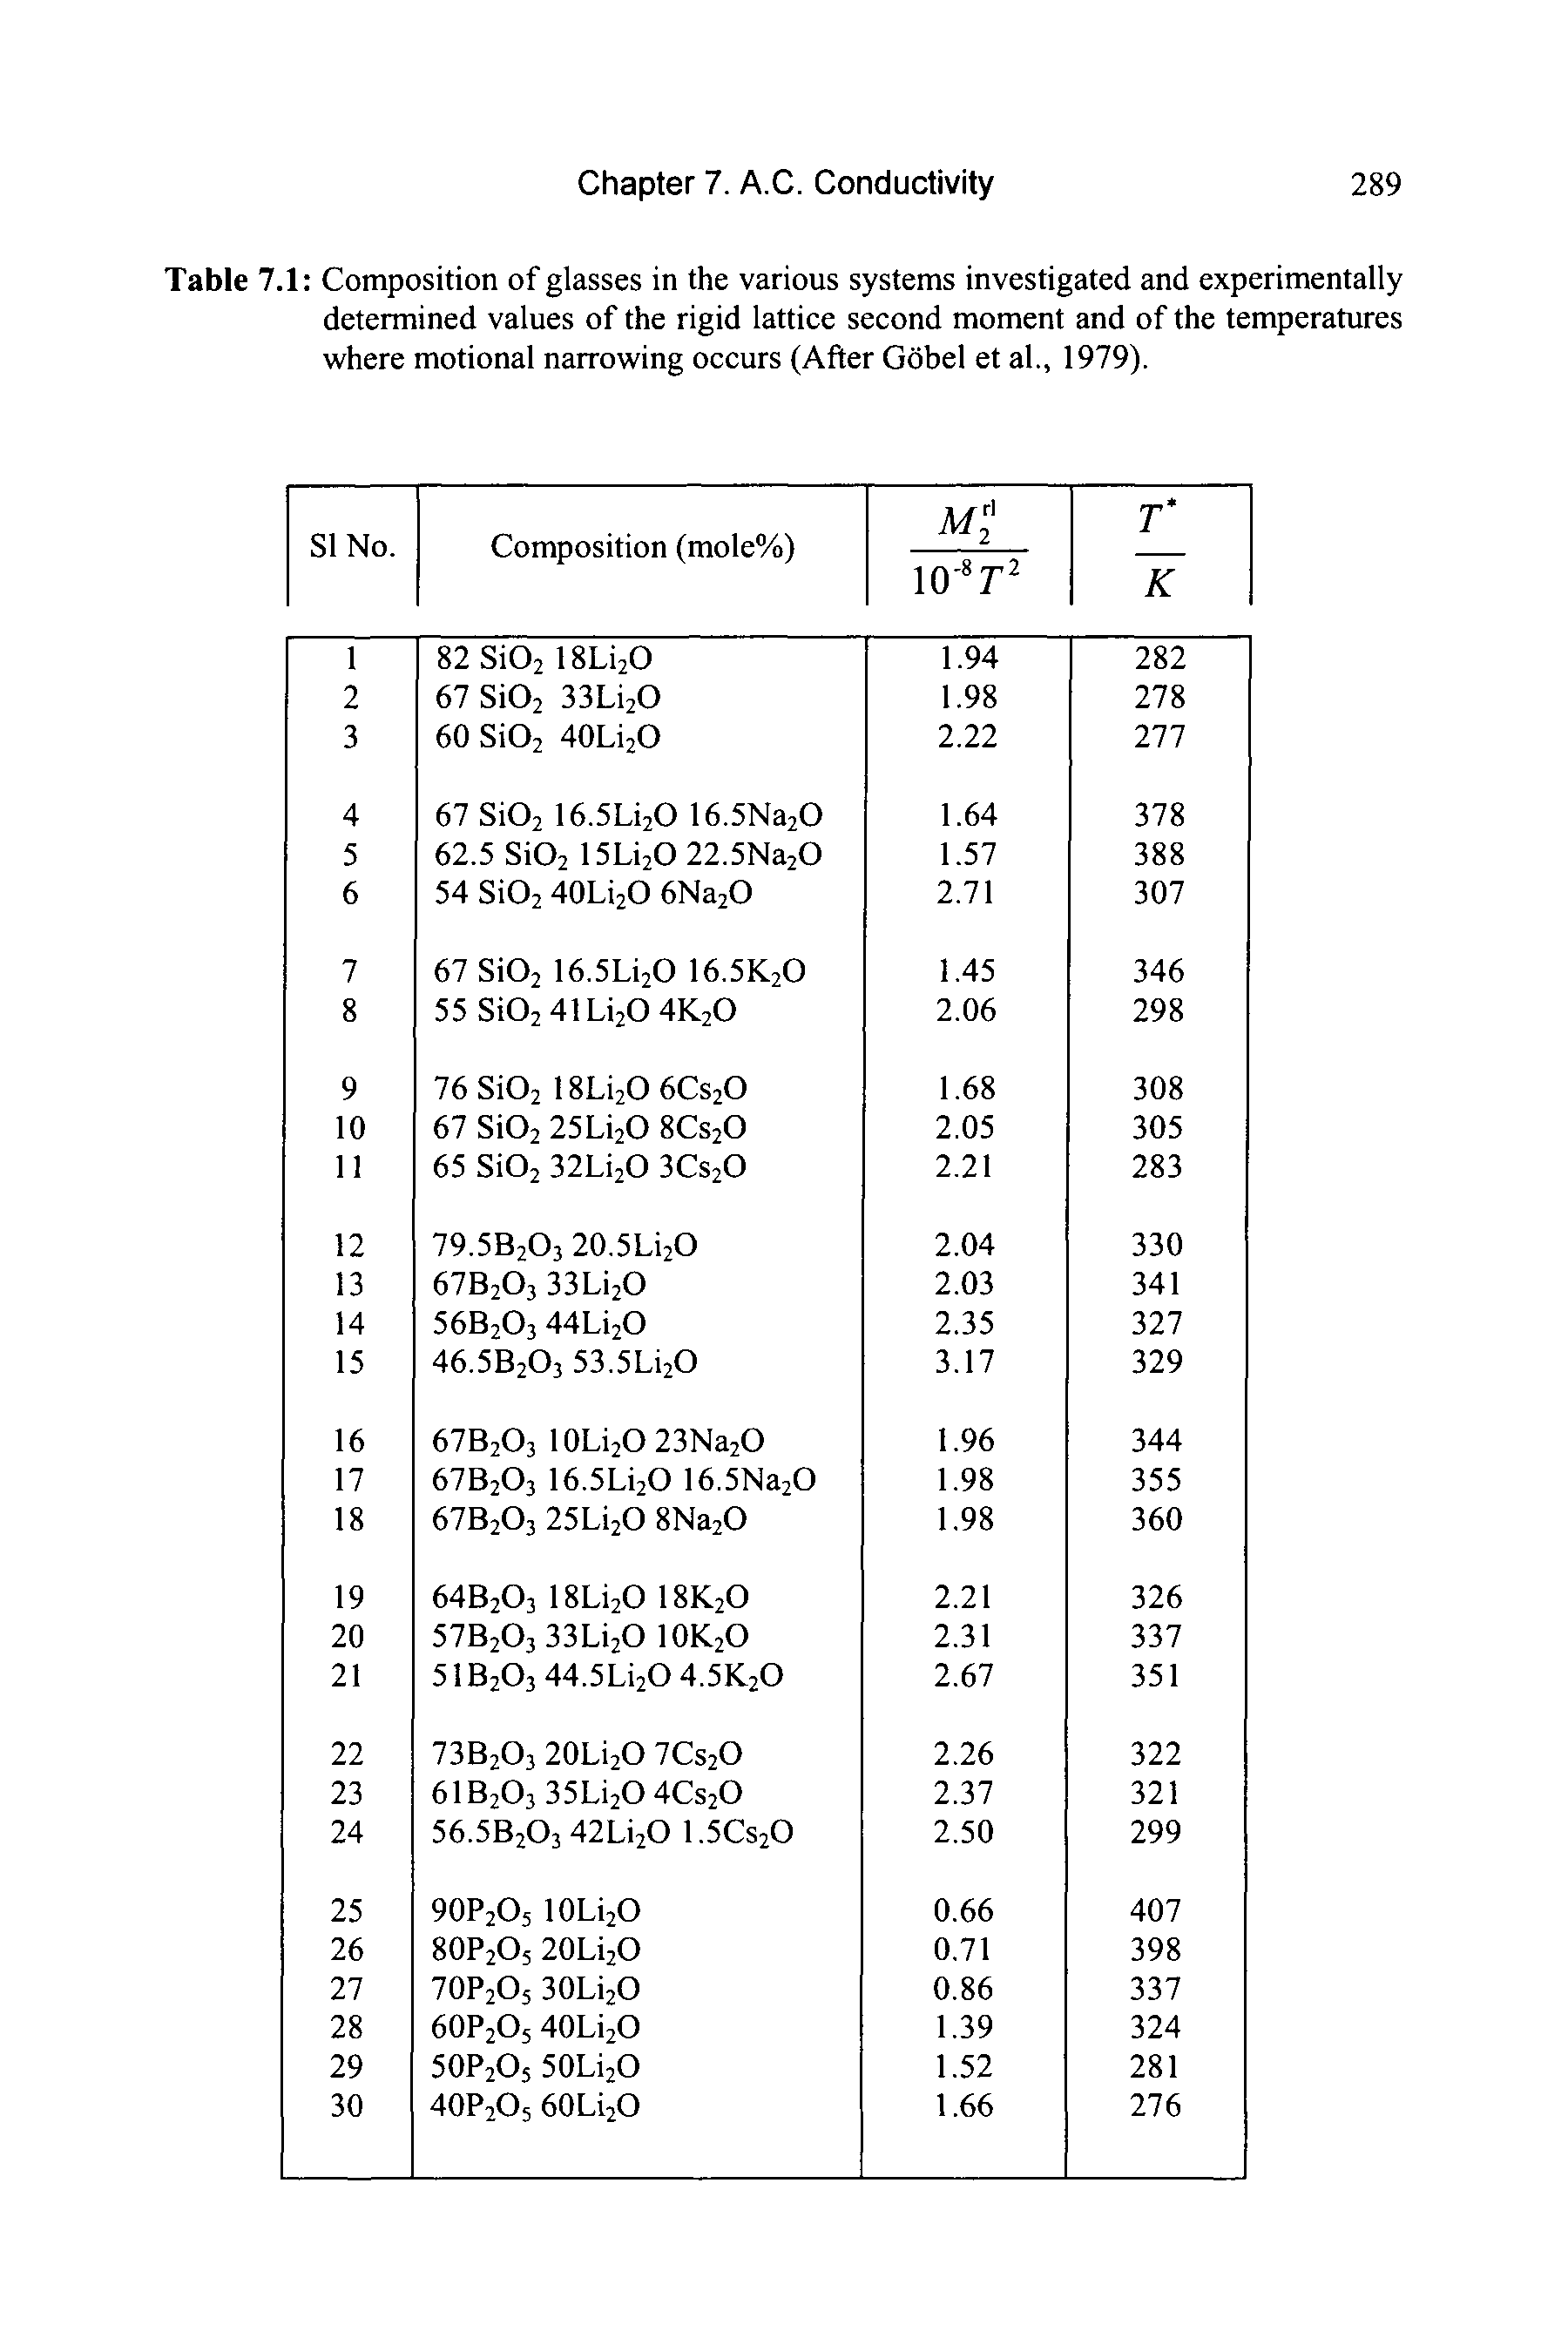 Table 7.1 Composition of glasses in the various systems investigated and experimentally determined values of the rigid lattice second moment and of the temperatures where motional narrowing occurs (After Gdbel et al., 1979).